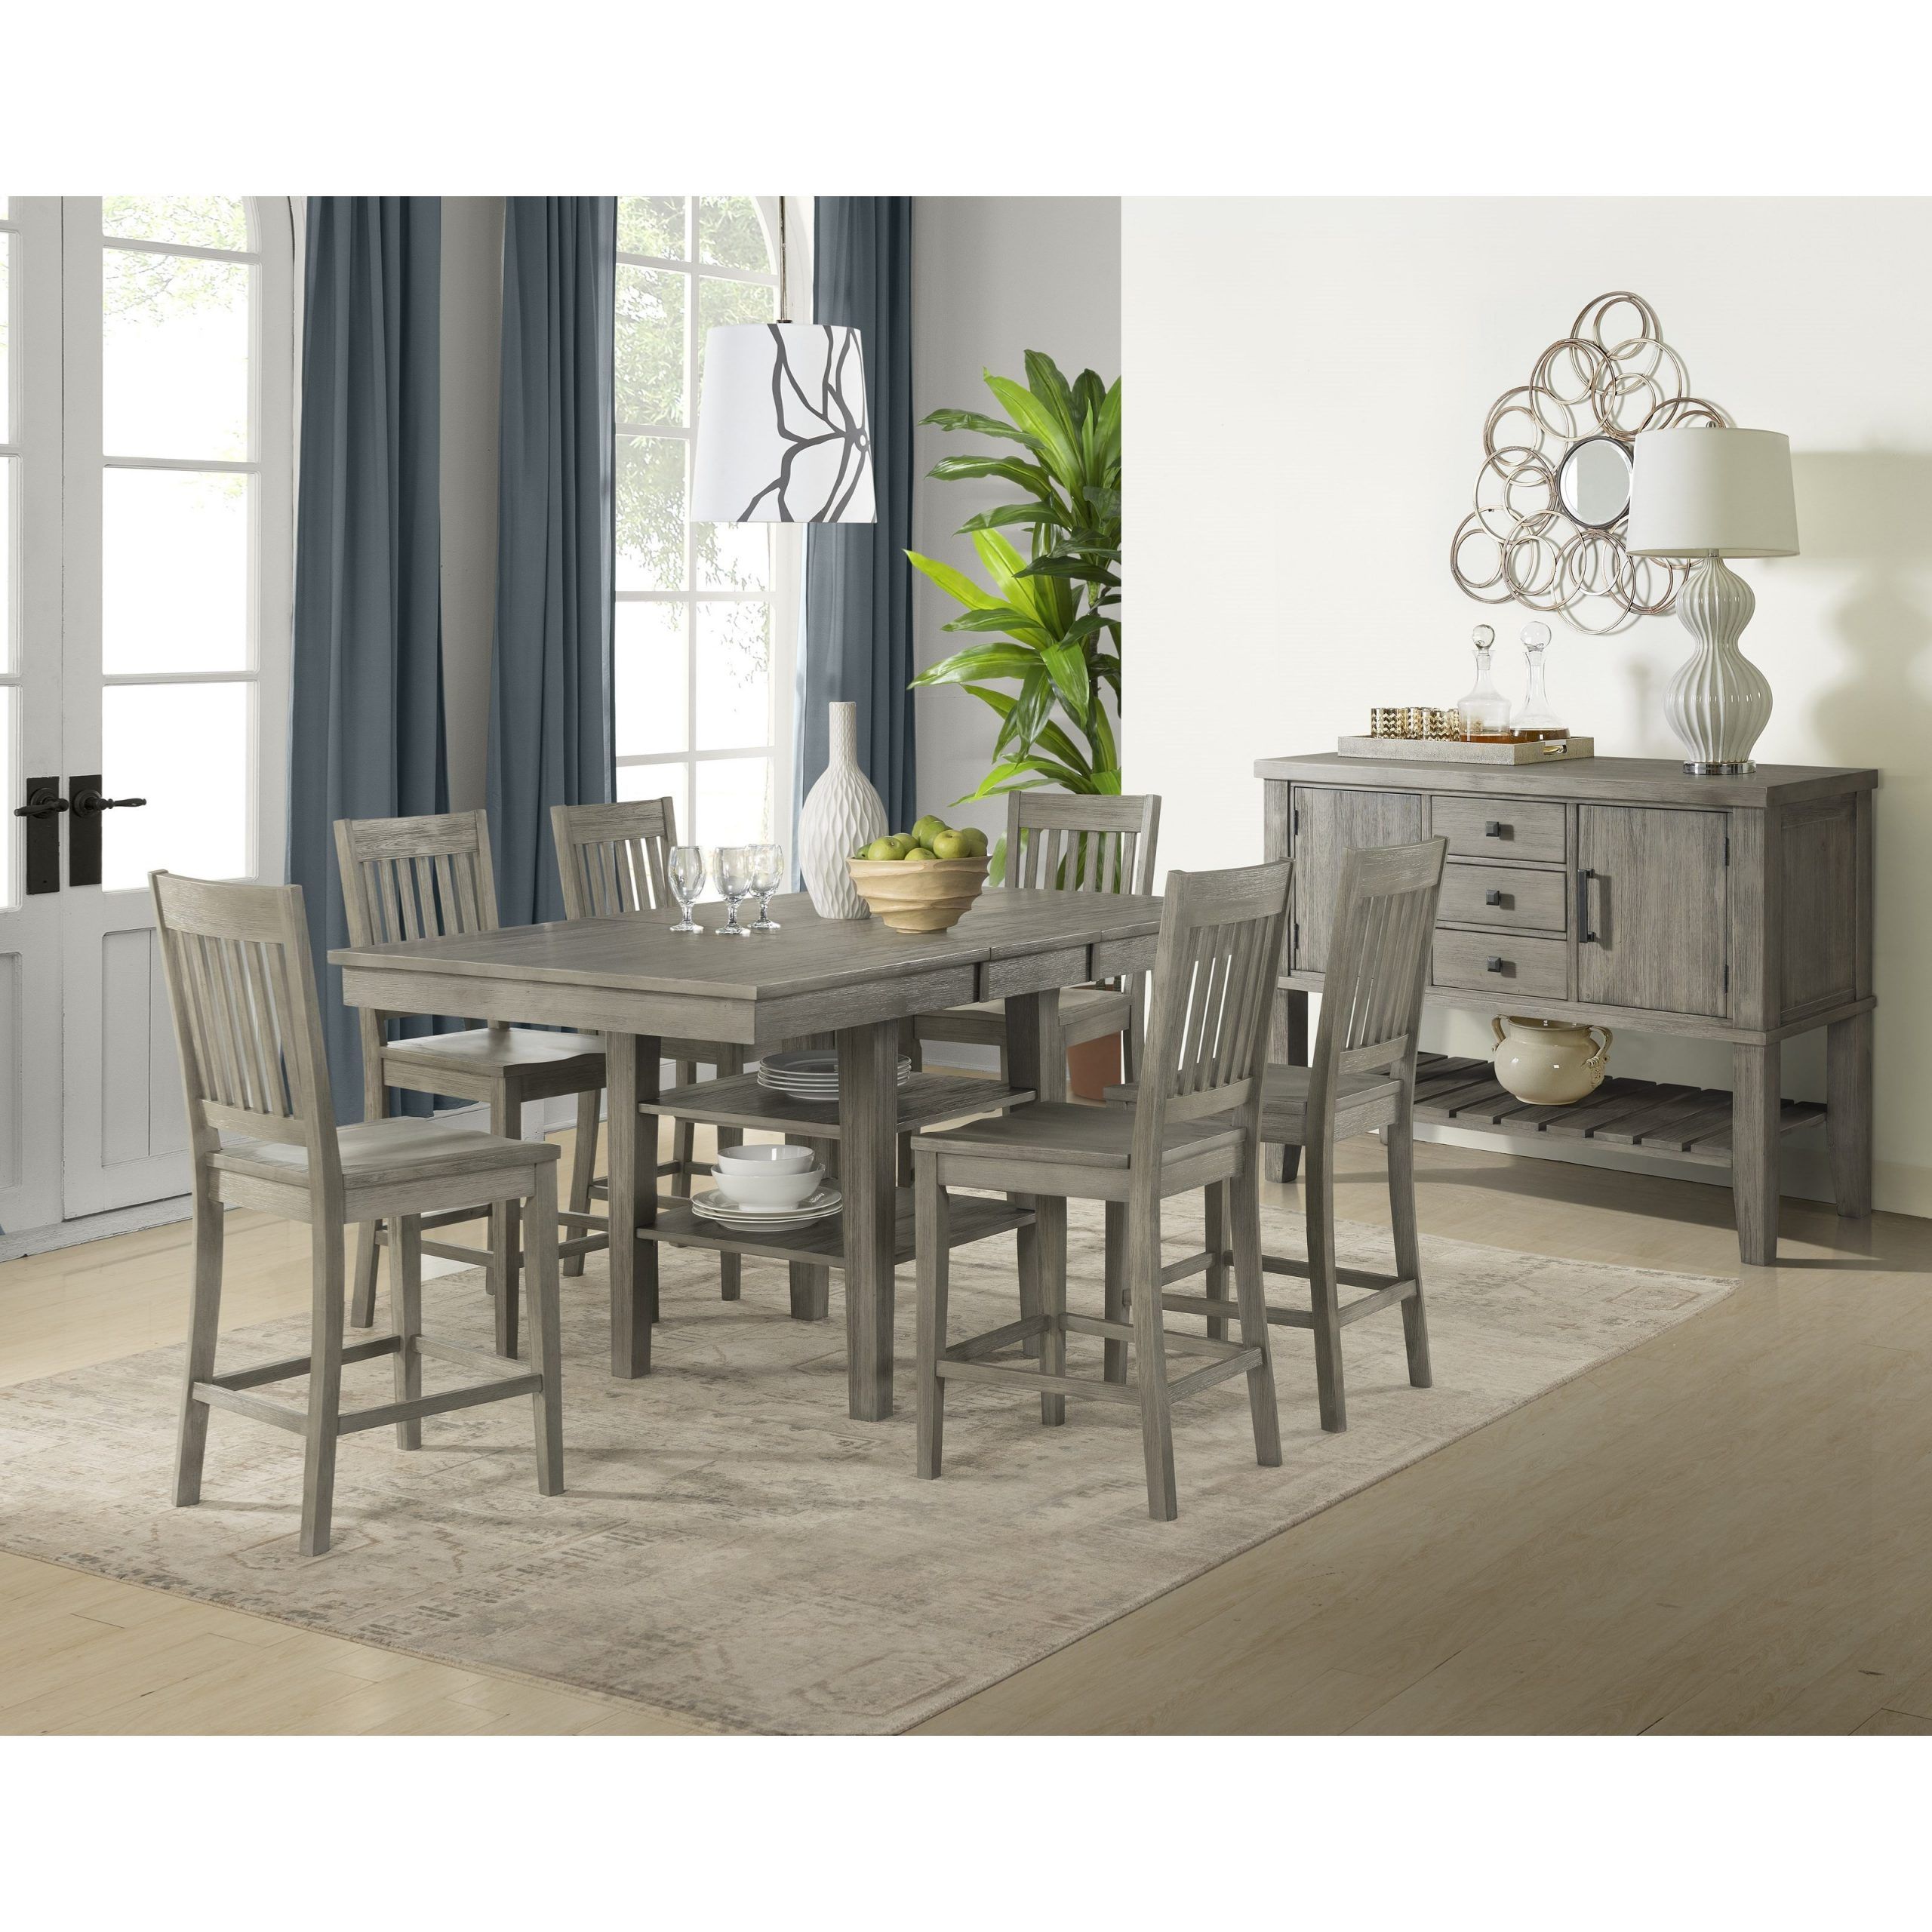 Fashionable Aamerica Huron Transitional Solid Wood Counter Height Throughout Charterville Counter Height Pedestal Dining Tables (View 18 of 20)